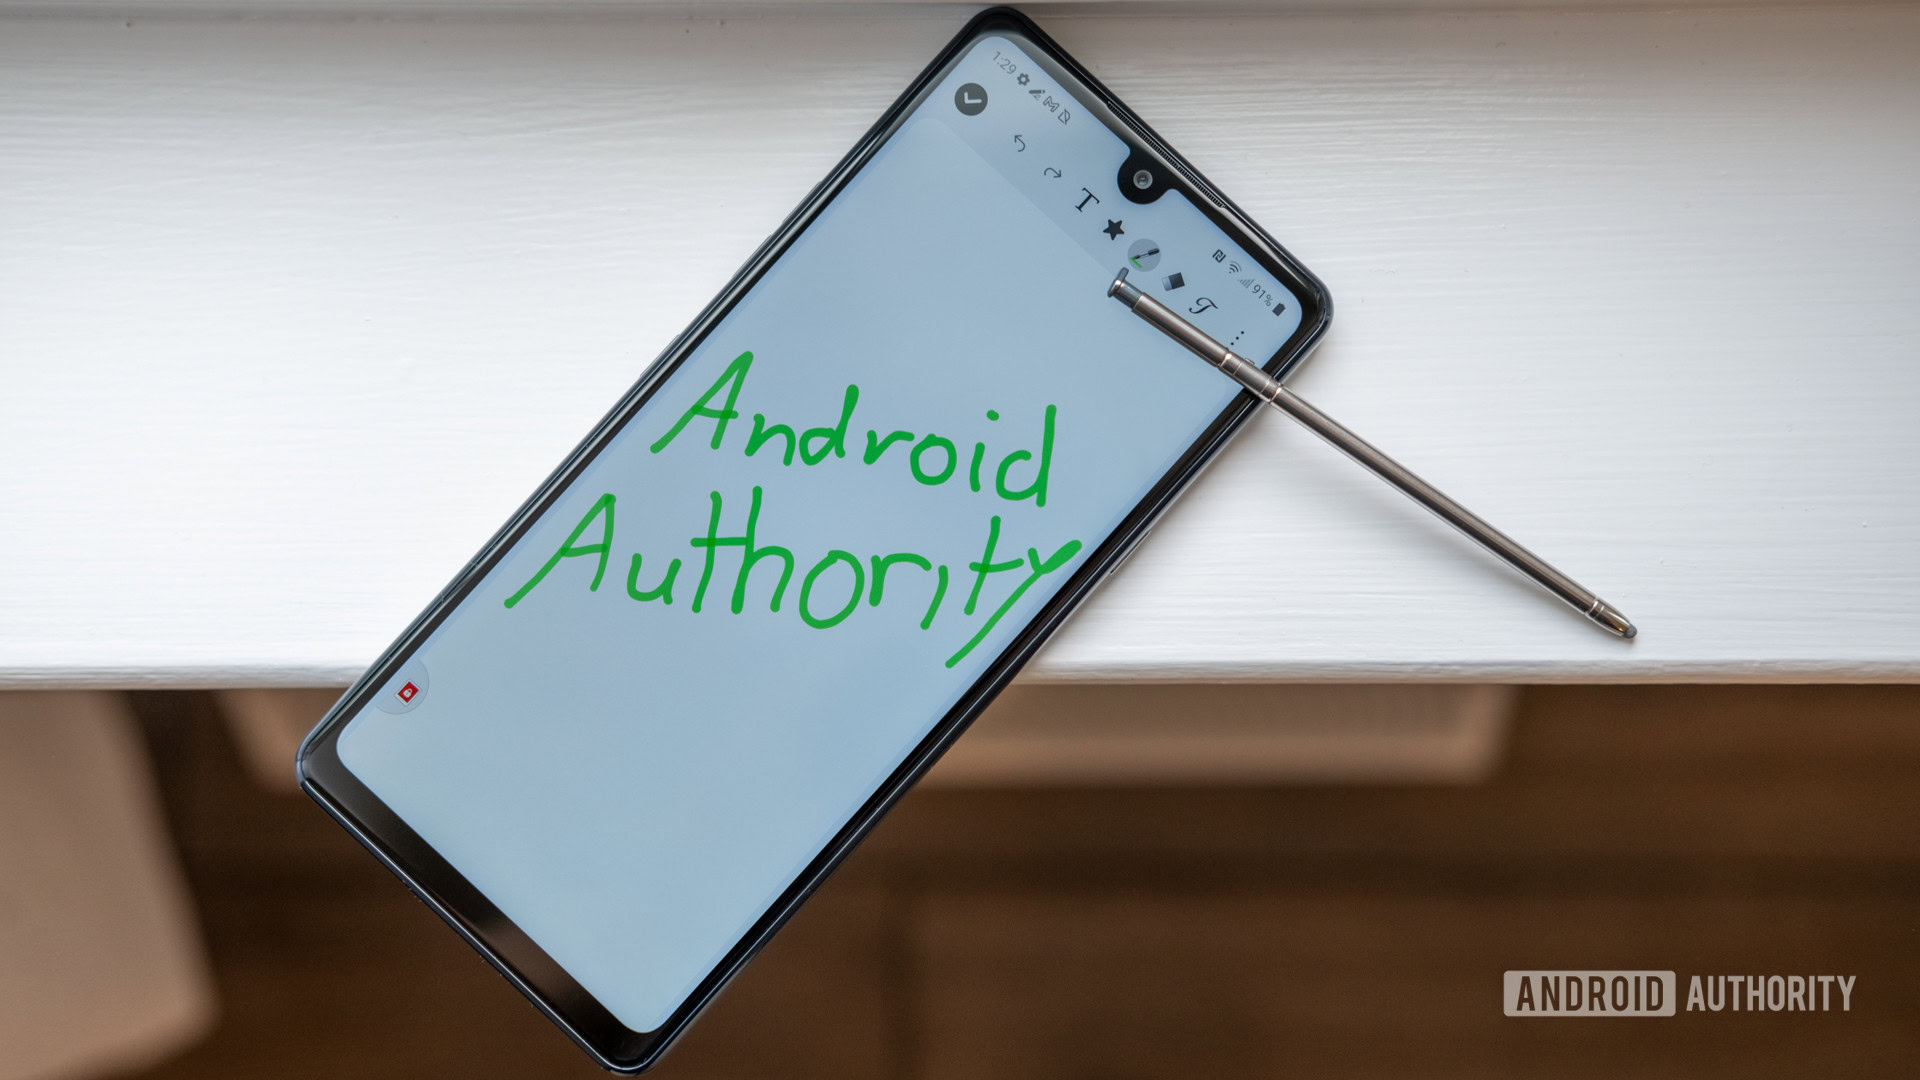 10 best stylus apps and S Pen apps for Android - Android Authority